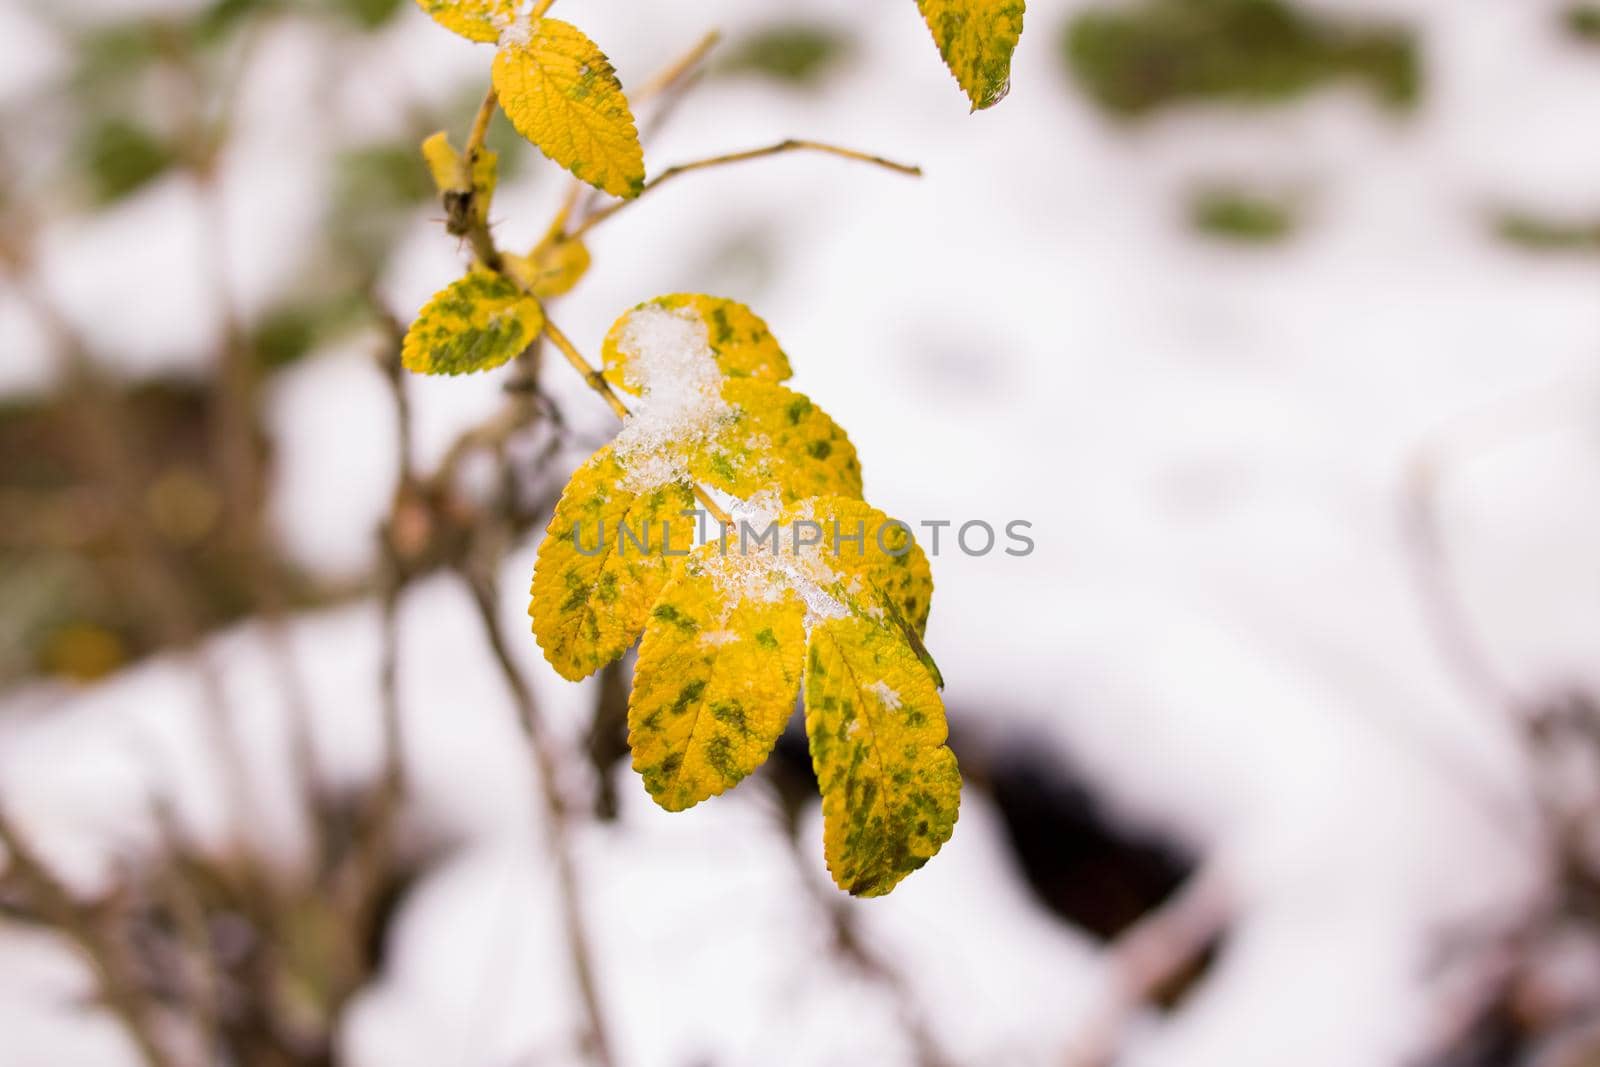 Snow on yellow plant leaves close up by Vera1703